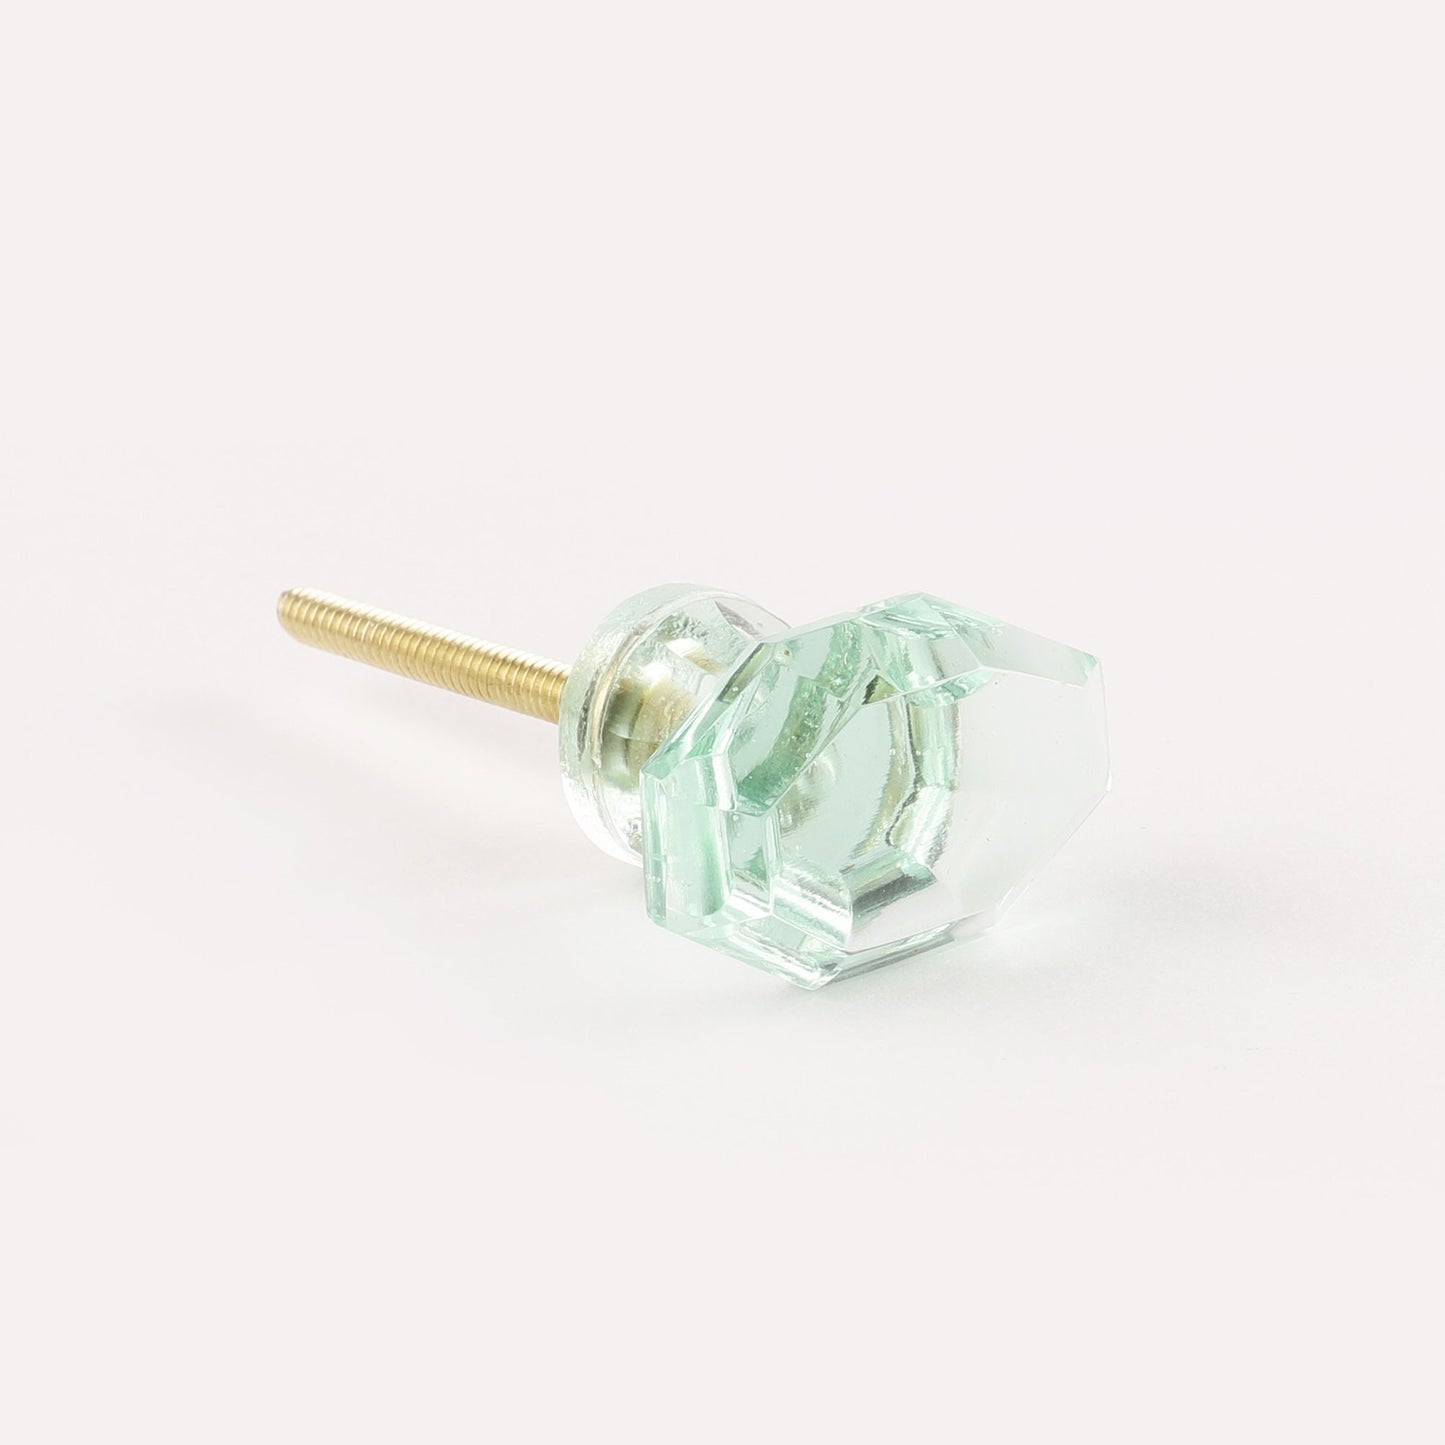 Teal Glass Pull Knobs (G19)